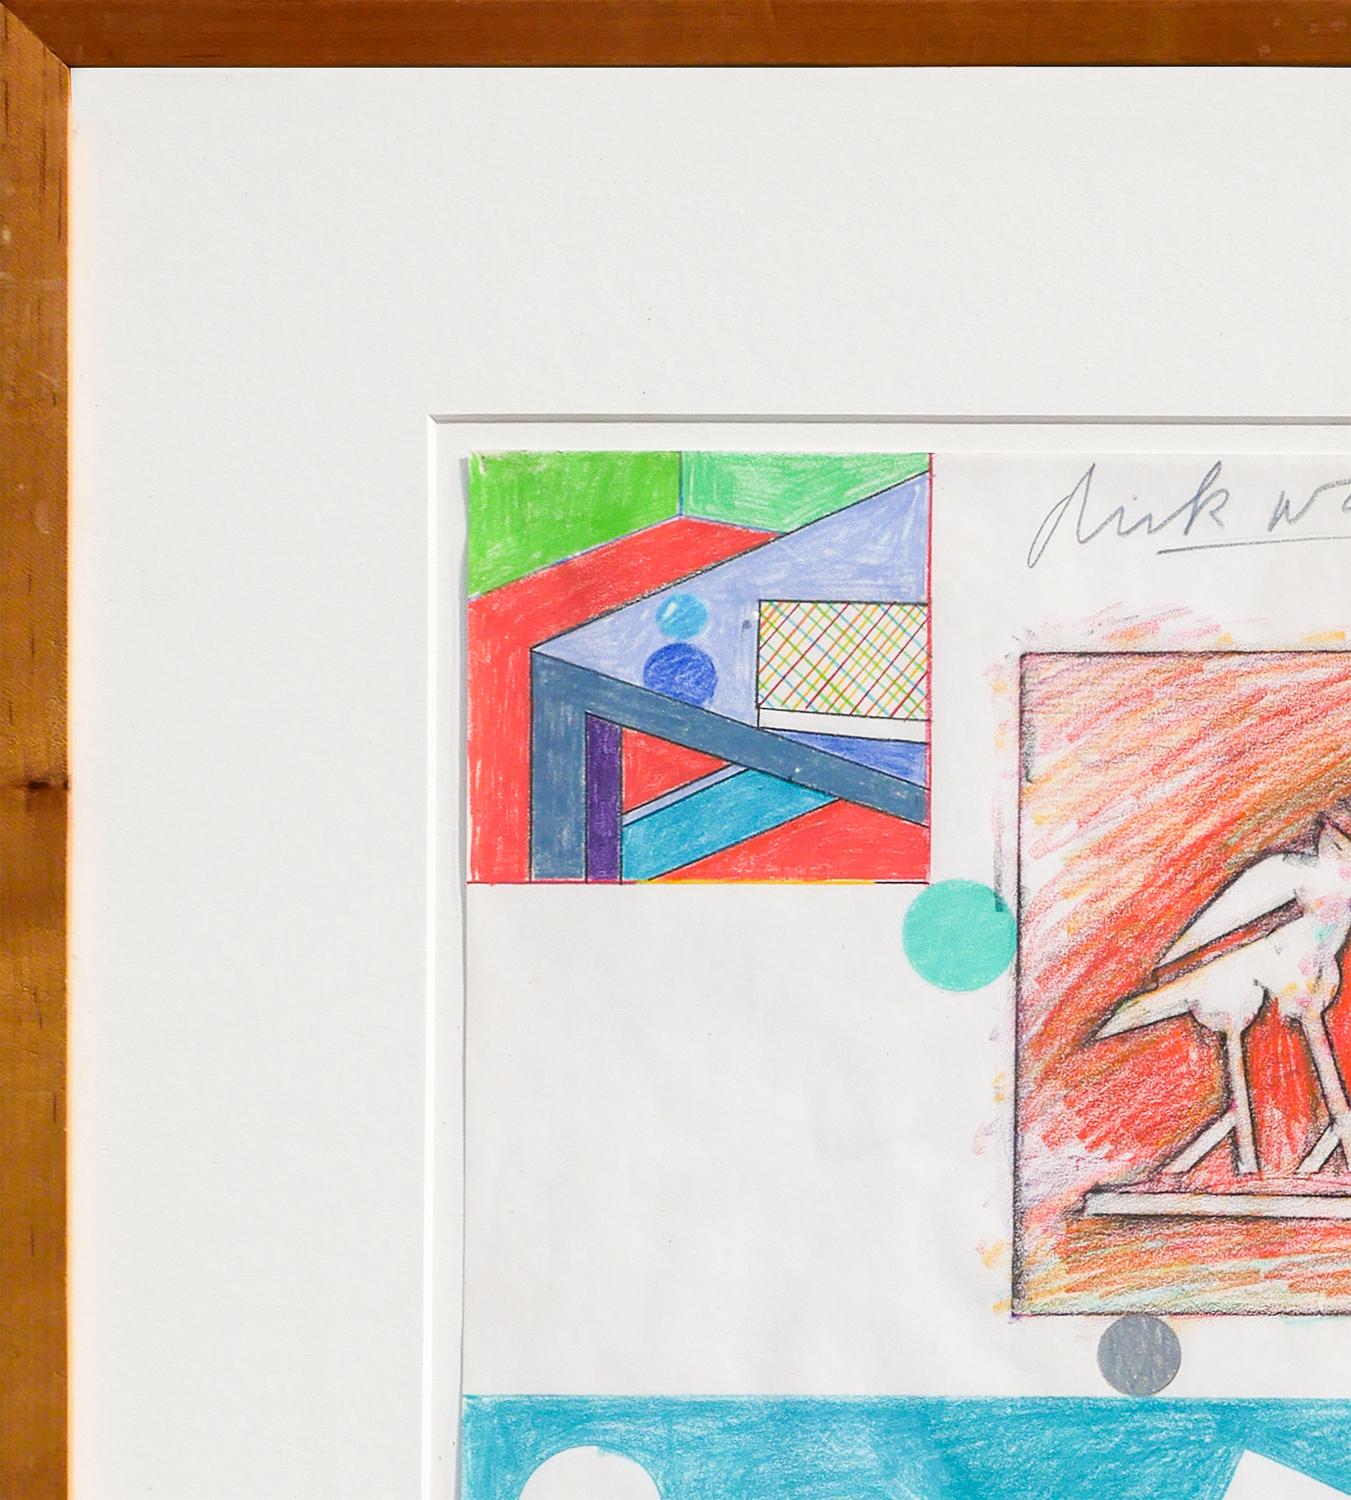 Colorful mixed media drawing of an abstract mixed media collage by Texas Artist, Dick Wray. The work depicts colorful shapes and geometric birds. Signed and dated by the artist at the top of the work. Framed and matted in a simple wooden frame.